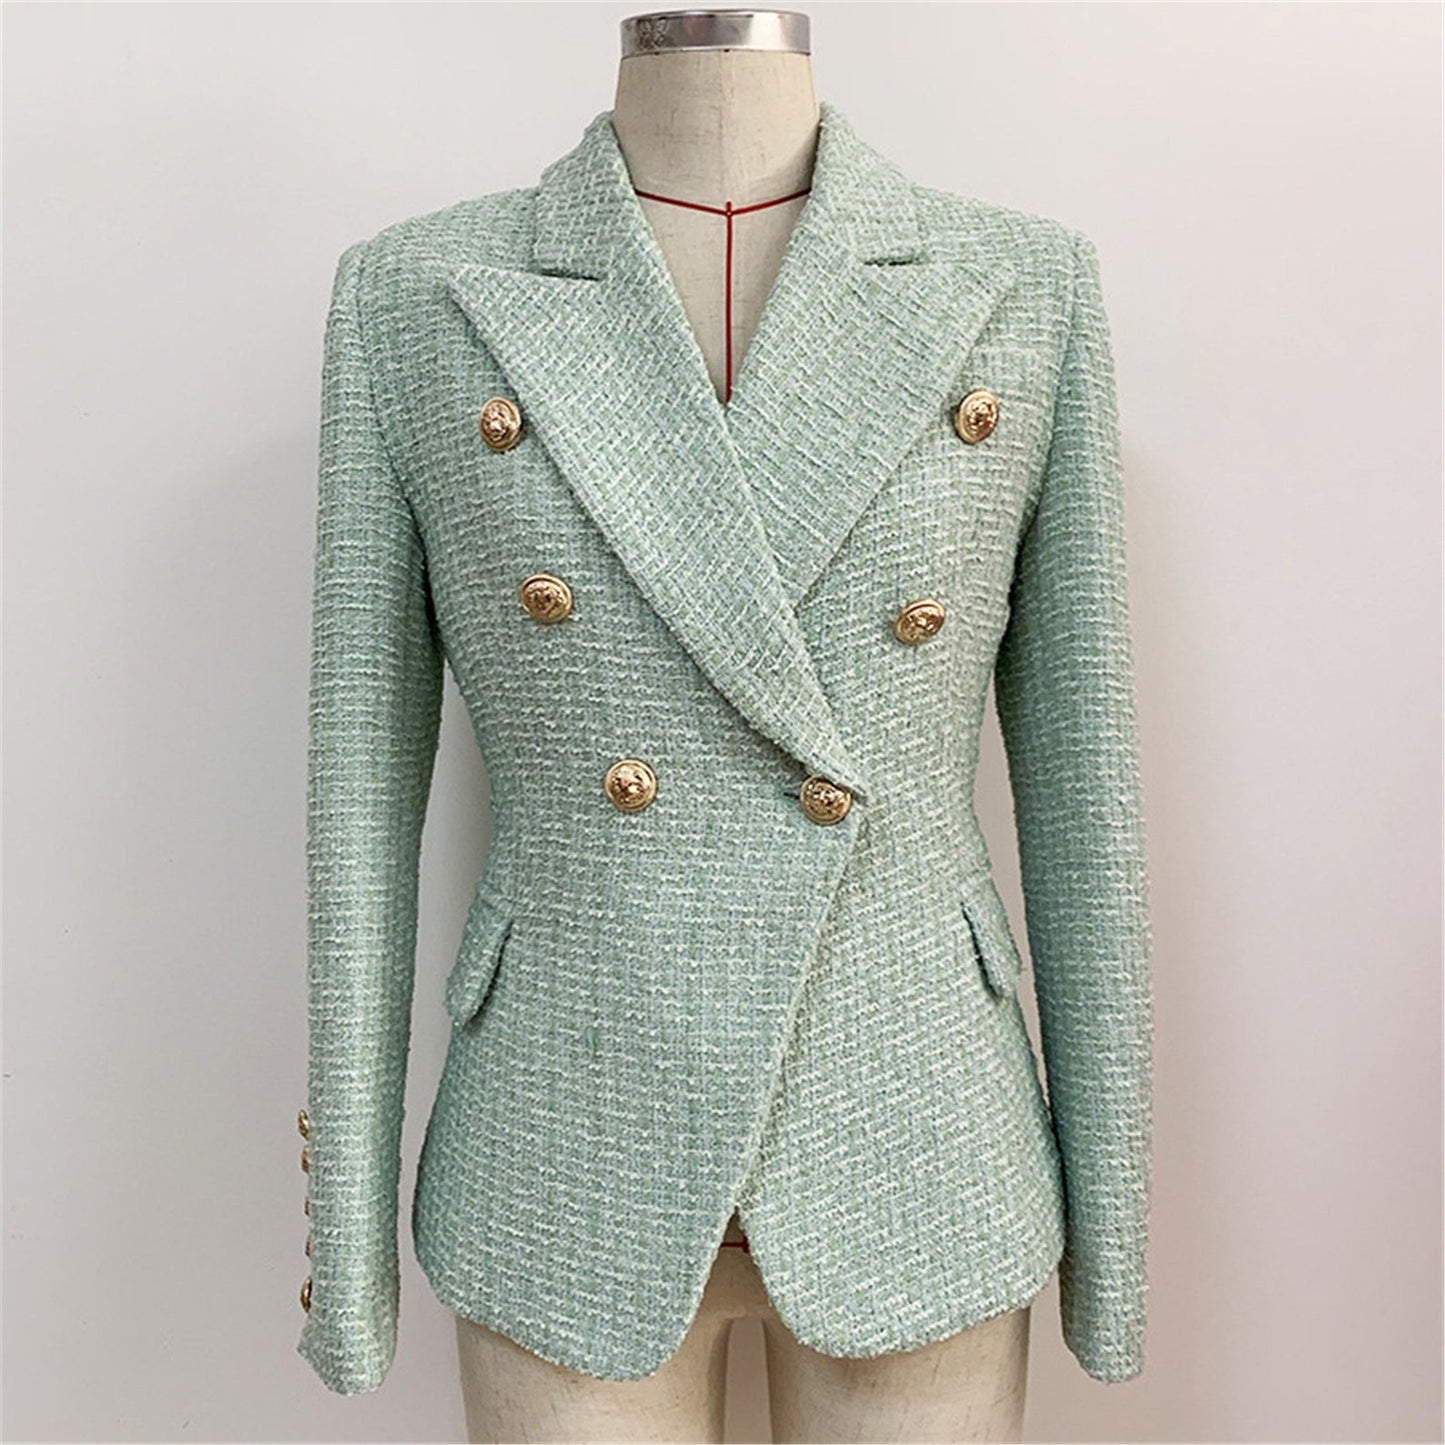 Women's Sequin Designer Inspired Metal Mint Green Tweed Blazer  UK CUSTOMER SERVICE! Women's sequin Designer Inspired Metal Mint Green Tweed Blazer - Finished off with statement sequin design all over and  pockets, this blazer is the ultimate festive power suit. Fully lined , long sleeves and buttons.  A great proposition for an evening out. Sequin blazer. We want you to be happy with our products! For the best fit, please refer to the detailed table of our sizes,